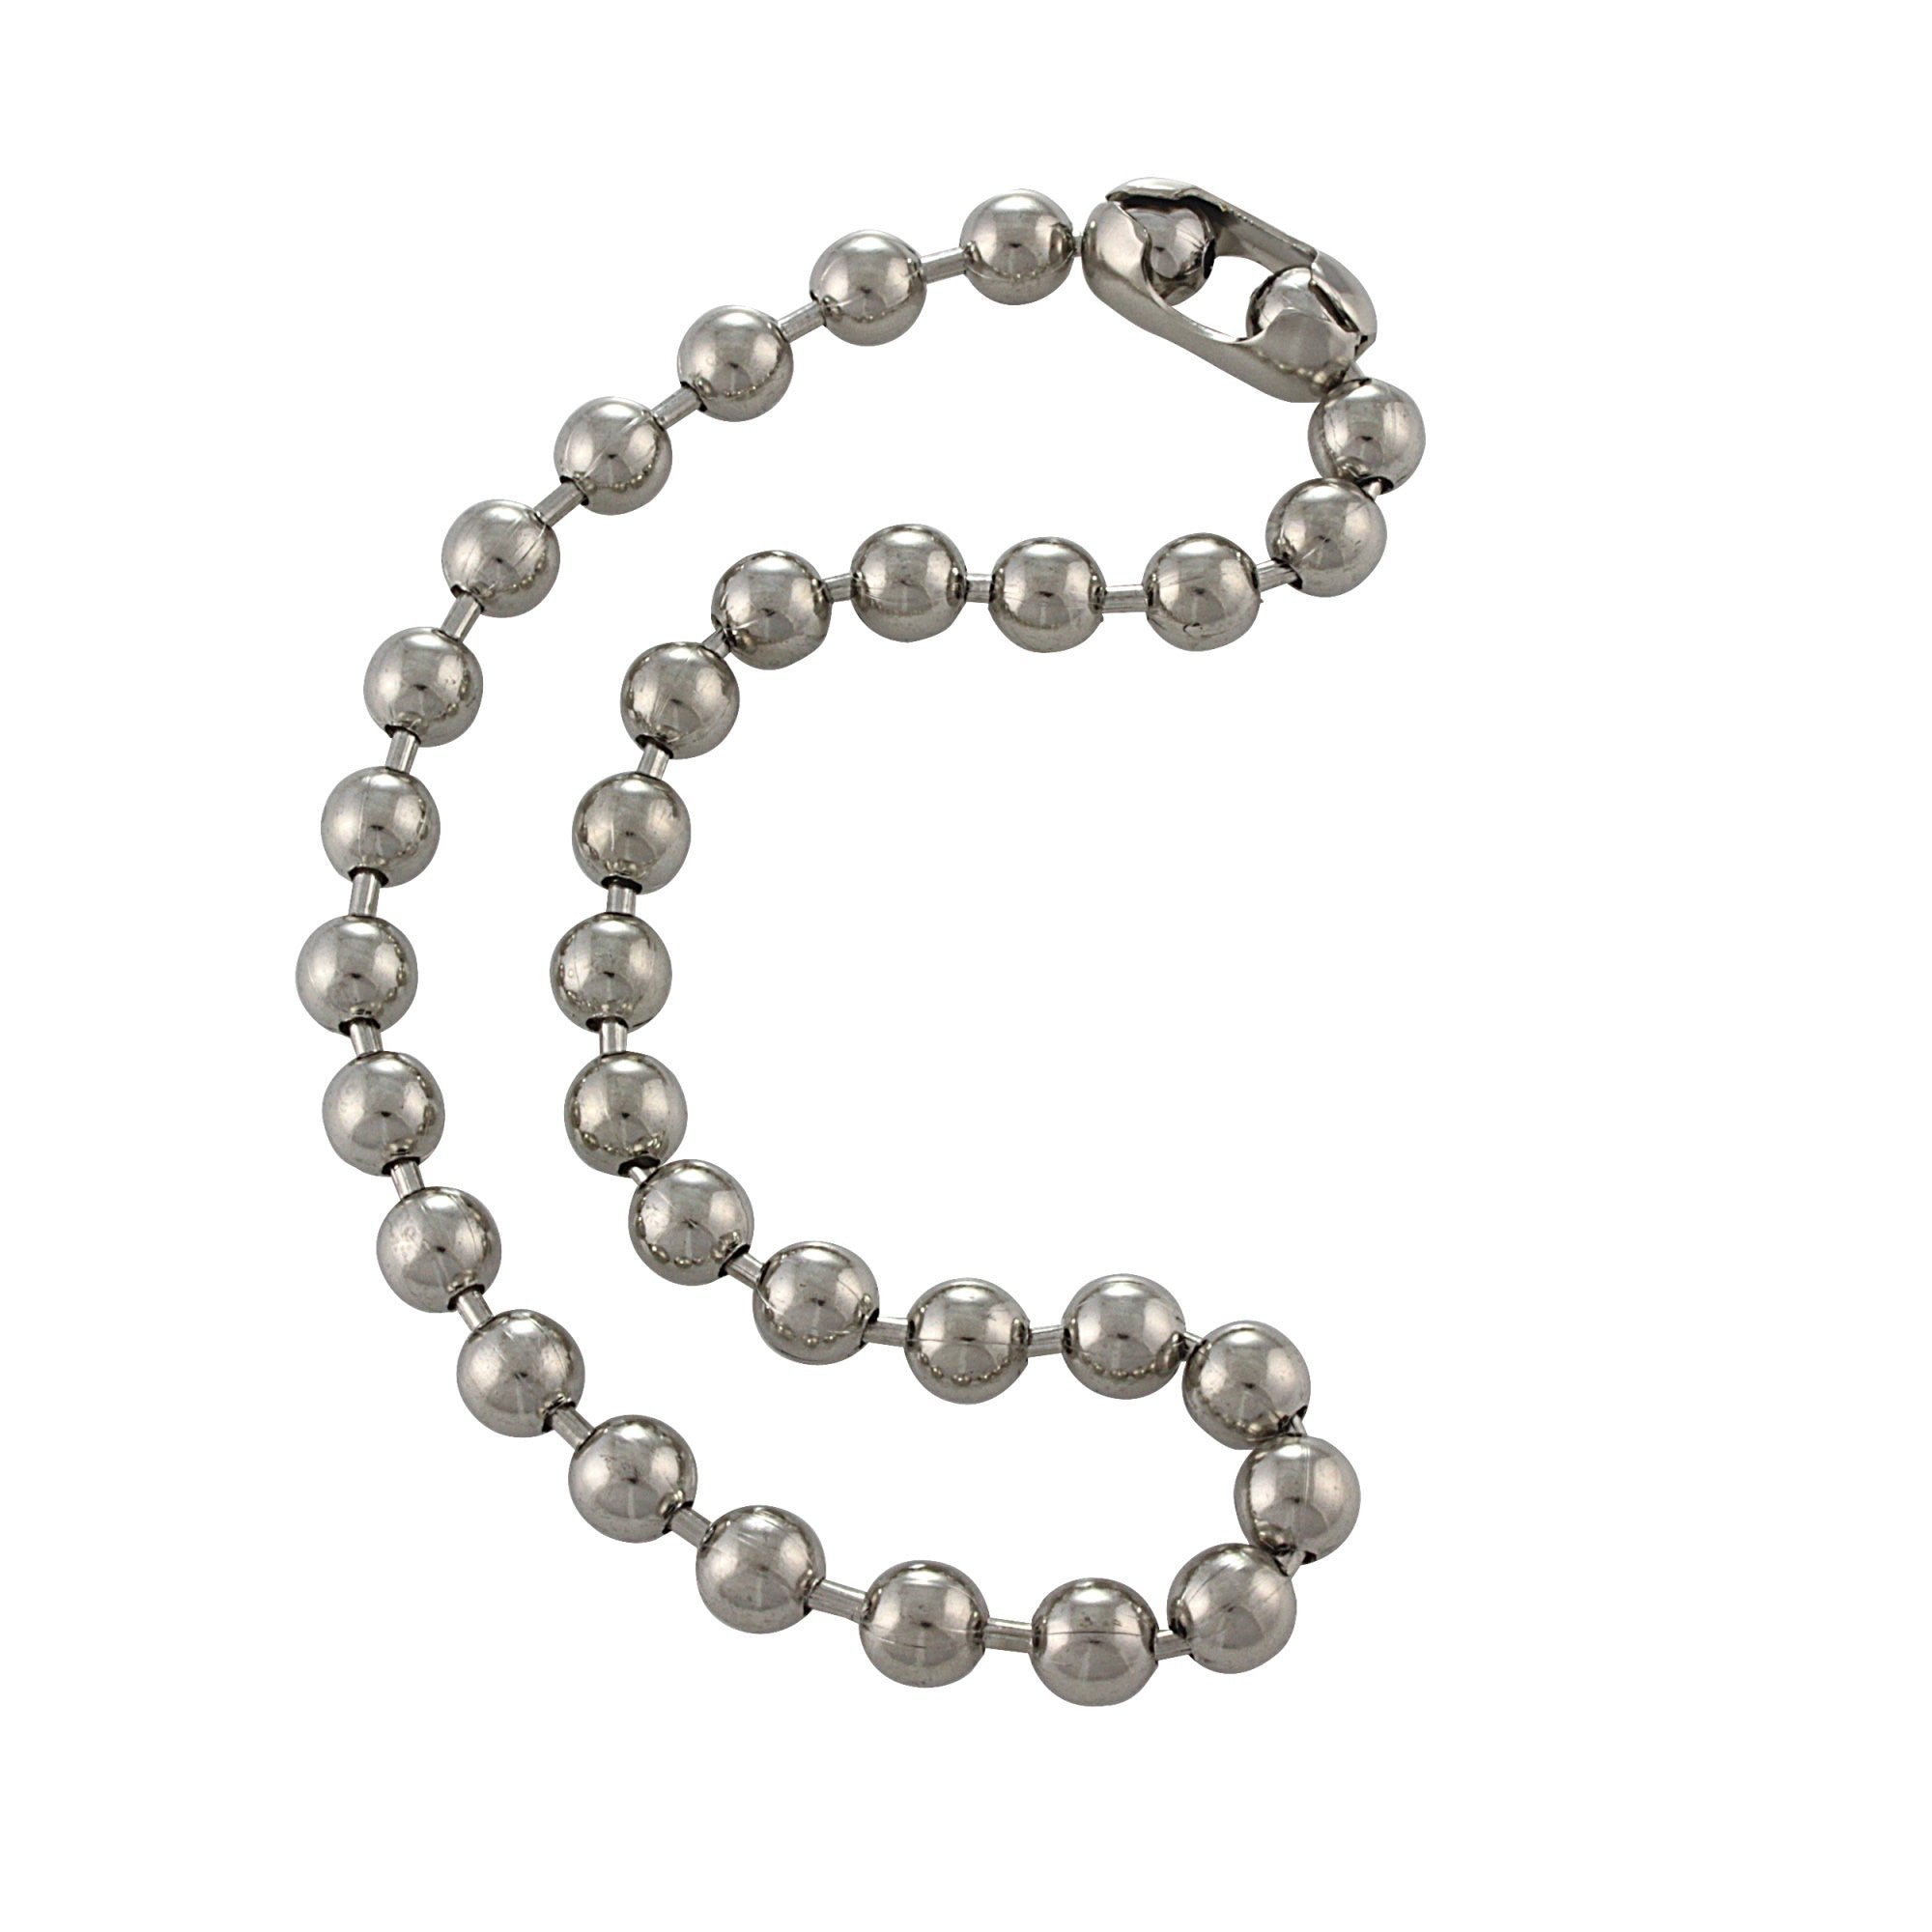 9.5mm Chunky Stainless Steel Chain Necklace